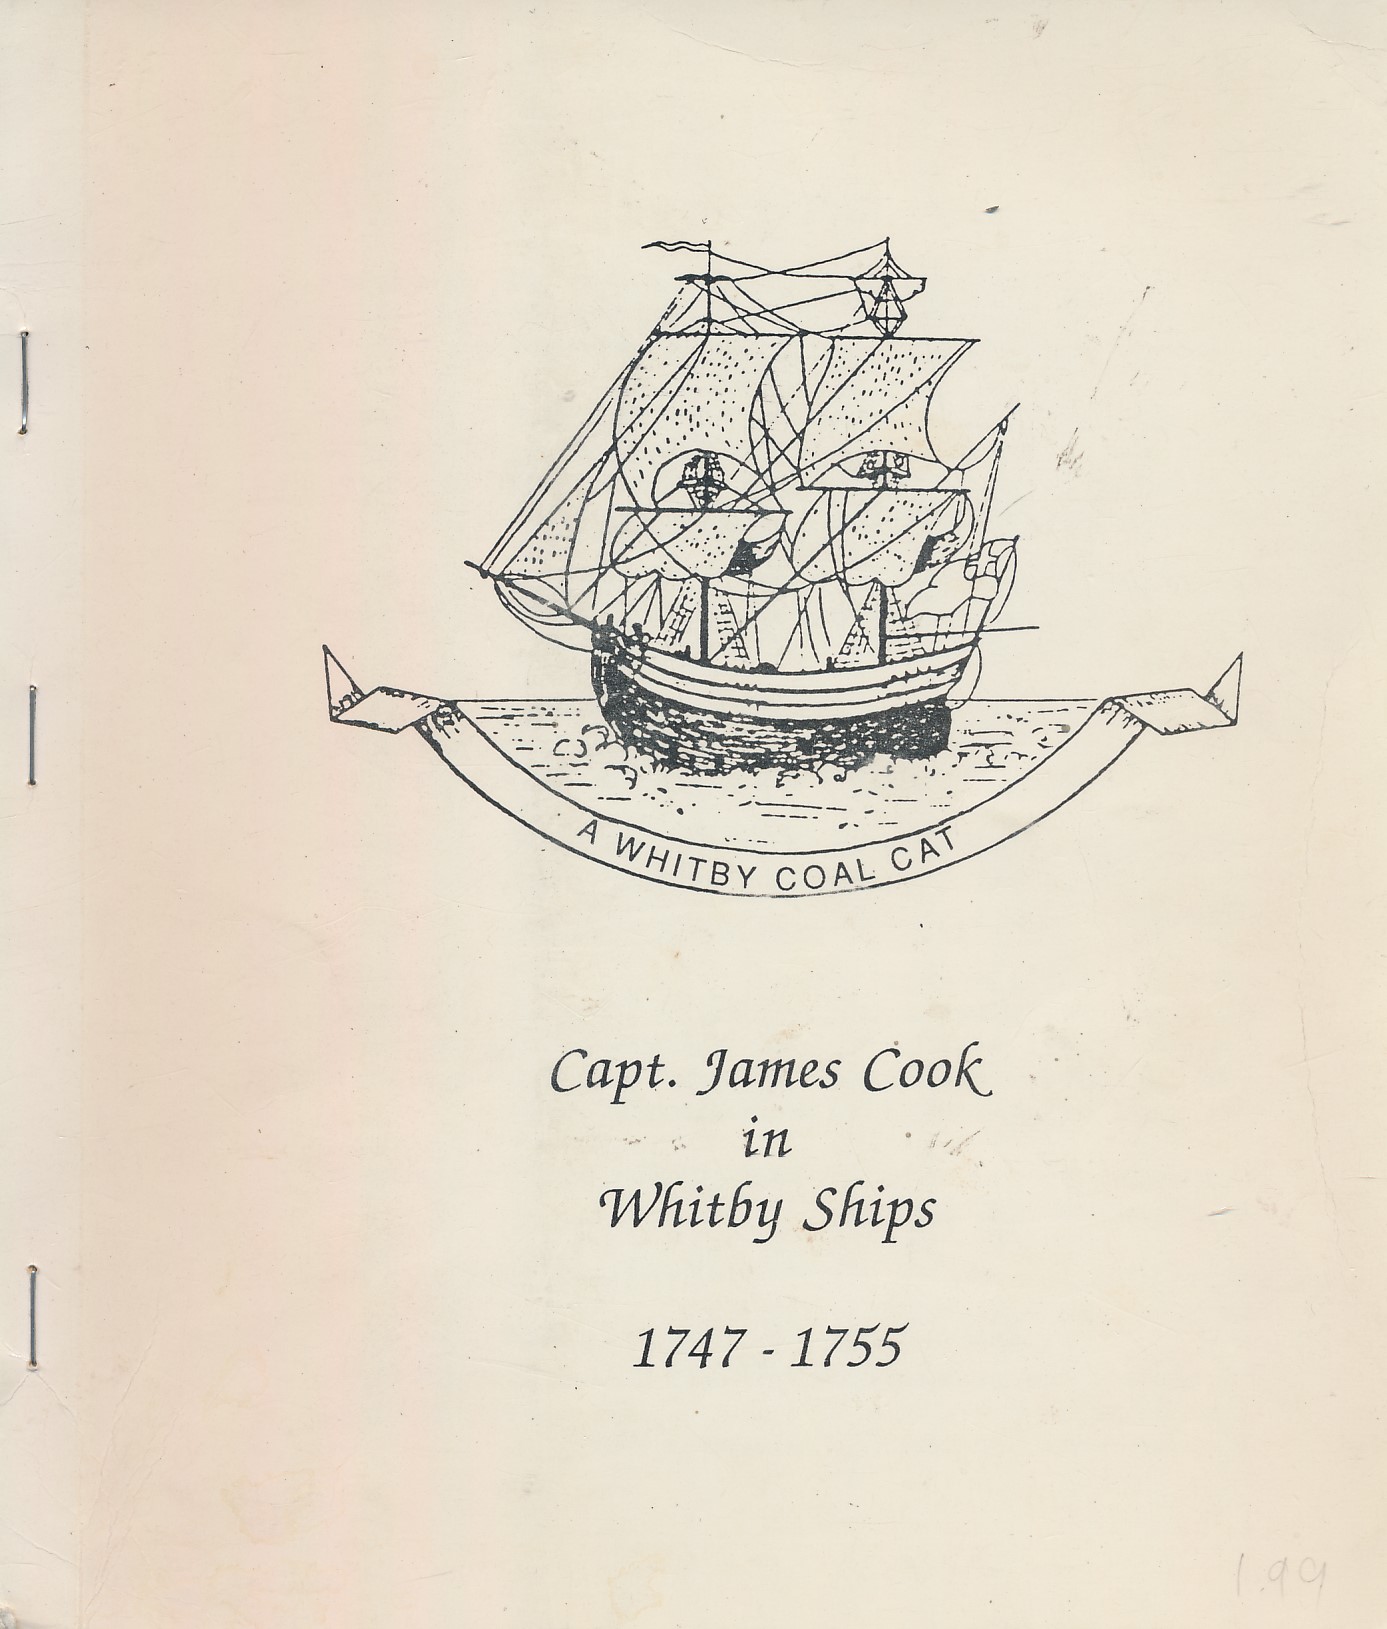 Capt. James Cook in Whitby Ships 1747-1755